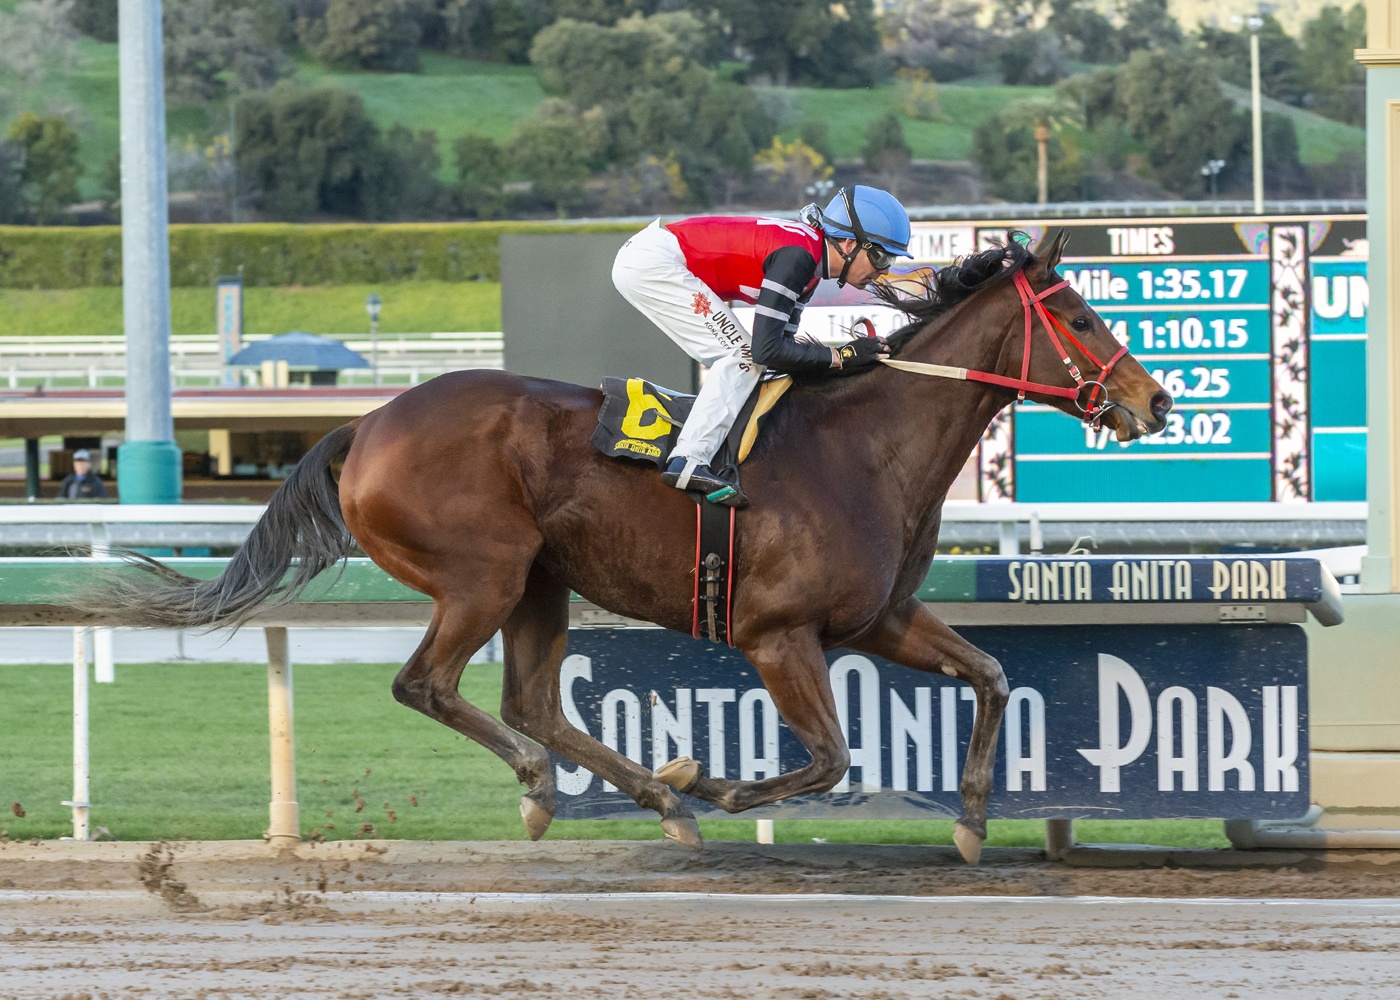 Canadian horse Escape Clause is making Santa Anita Park his home away from home as he runs away with the win in the La Canada Stakes last weekend. (Image: Orange County Register)